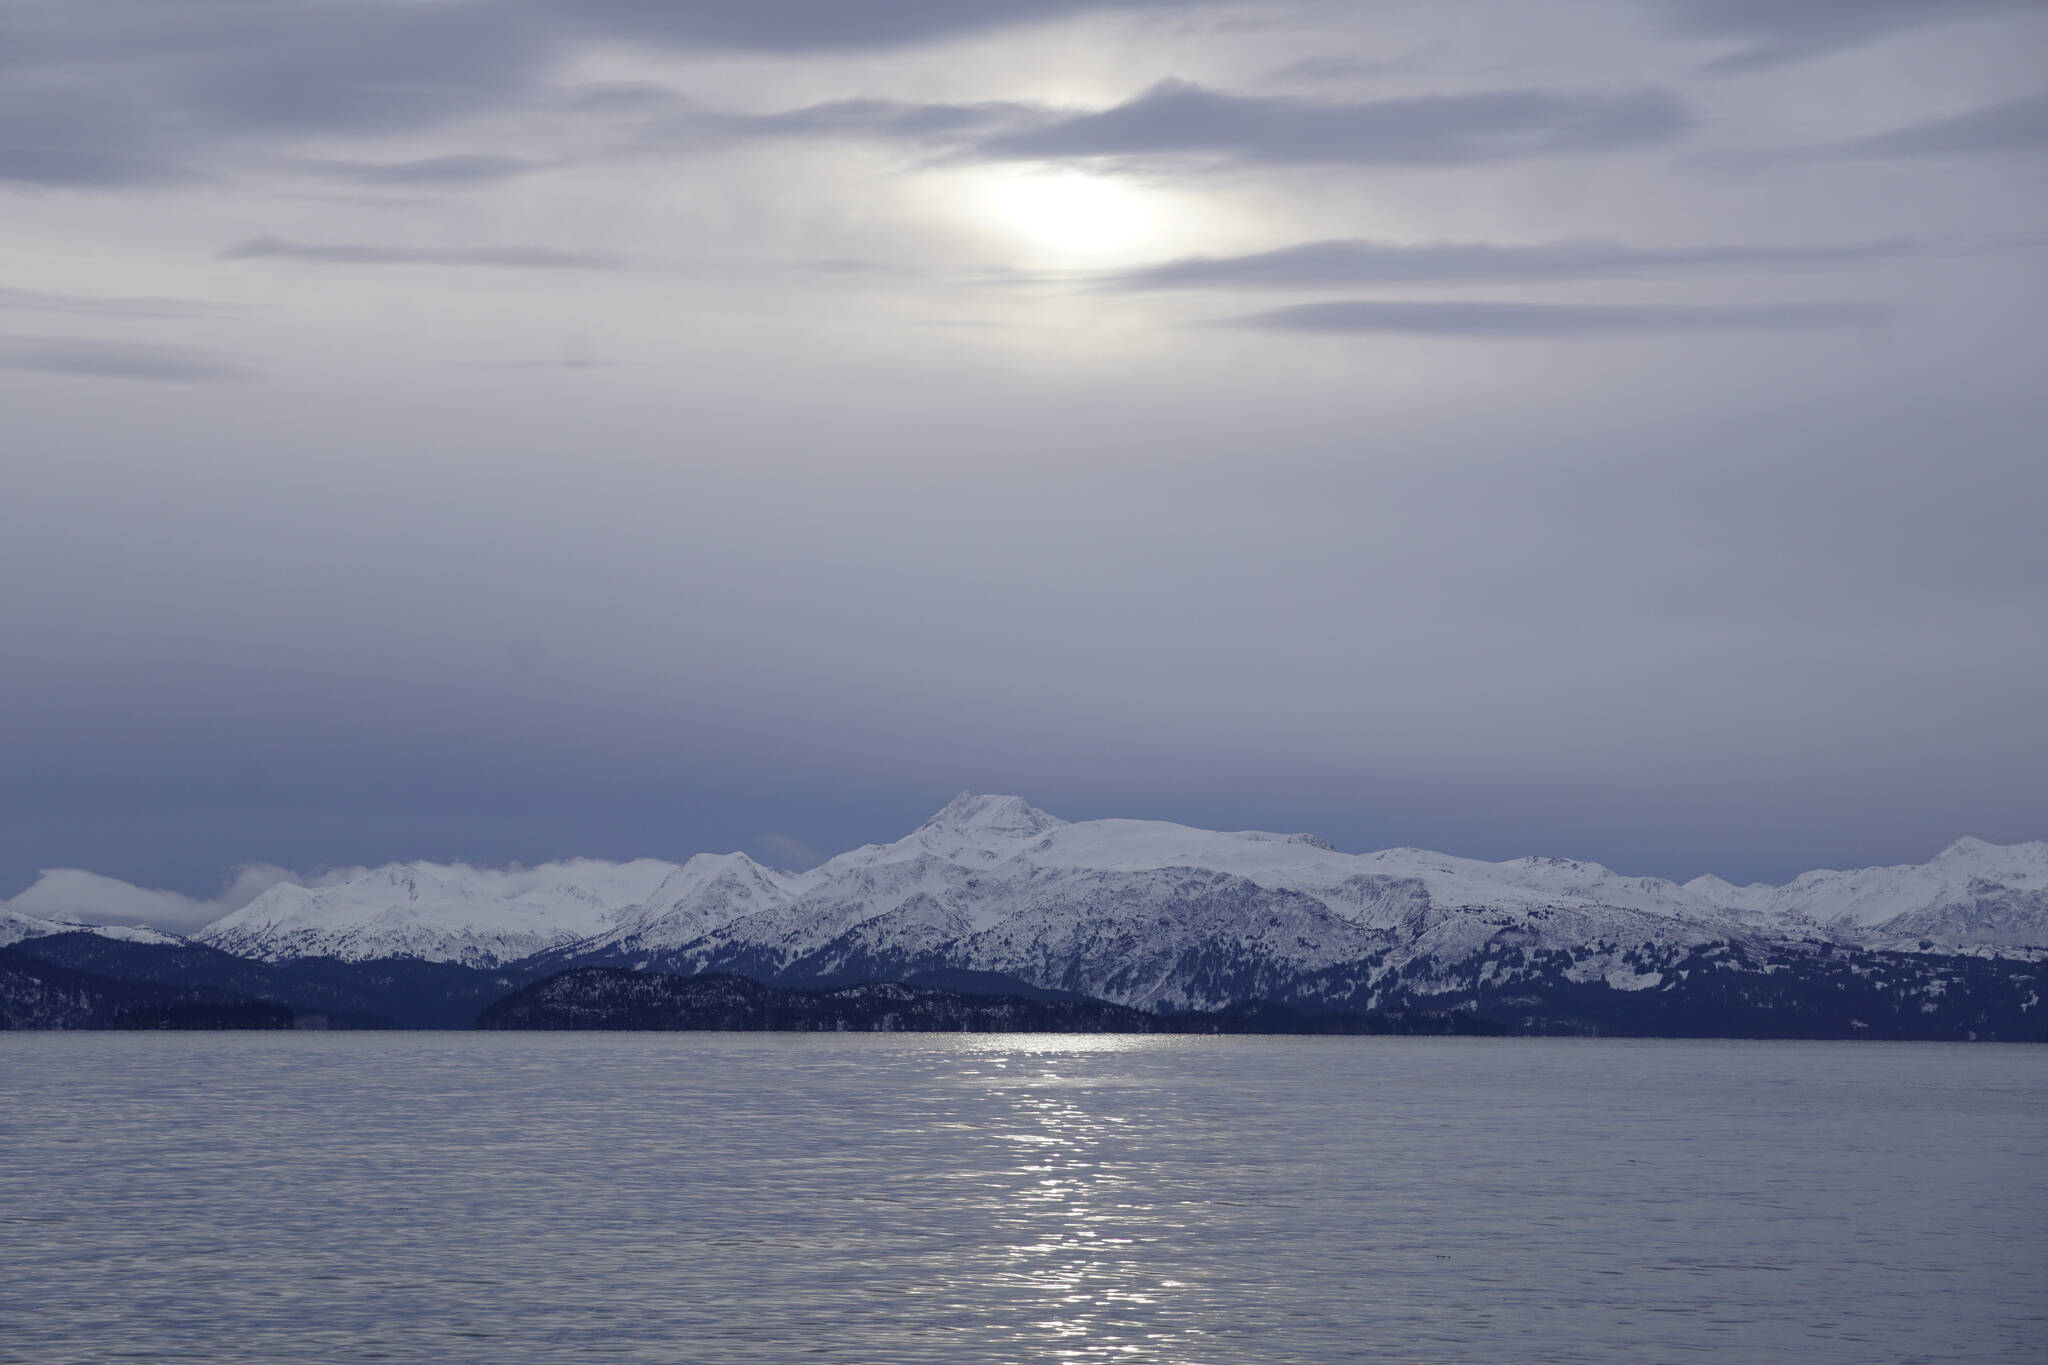 Clouds obscure the sun on Monday, Jan. 18, 2022, as seen from the Mariner Park beach in Homer, Alaska. Yukon Island is in the distance. Almost a month after the winter solstice, the sun rises higher in the sky at mid-day. (Photo by Michael Armstrong/Homer News)